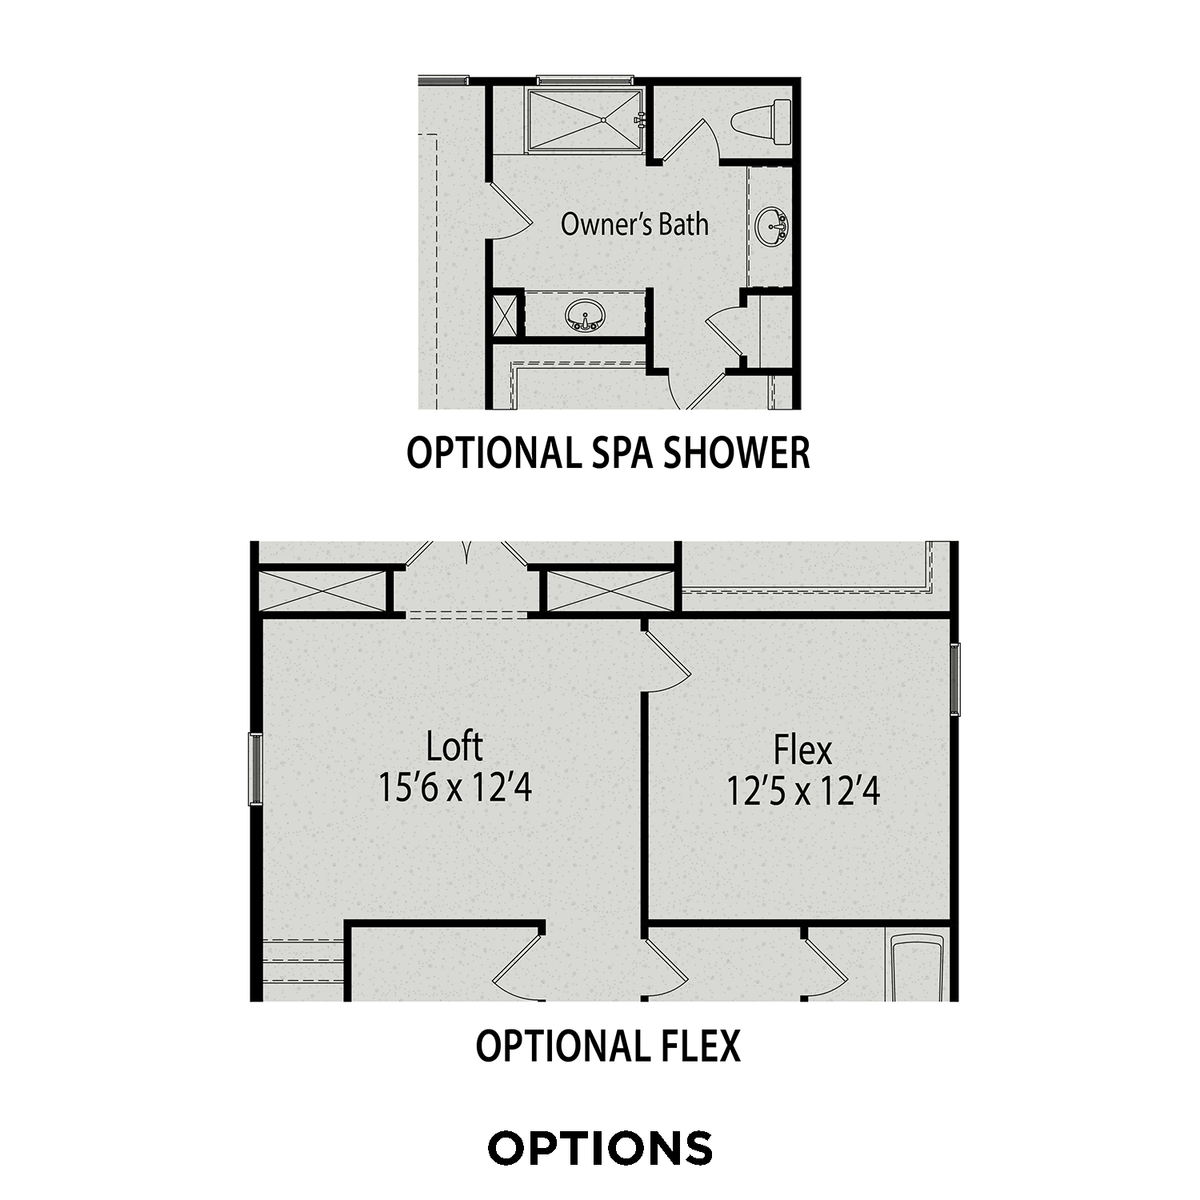 4 - The Preston A floor plan layout for 346 Old Fashioned Way in Davidson Homes' Wellers Knoll community.